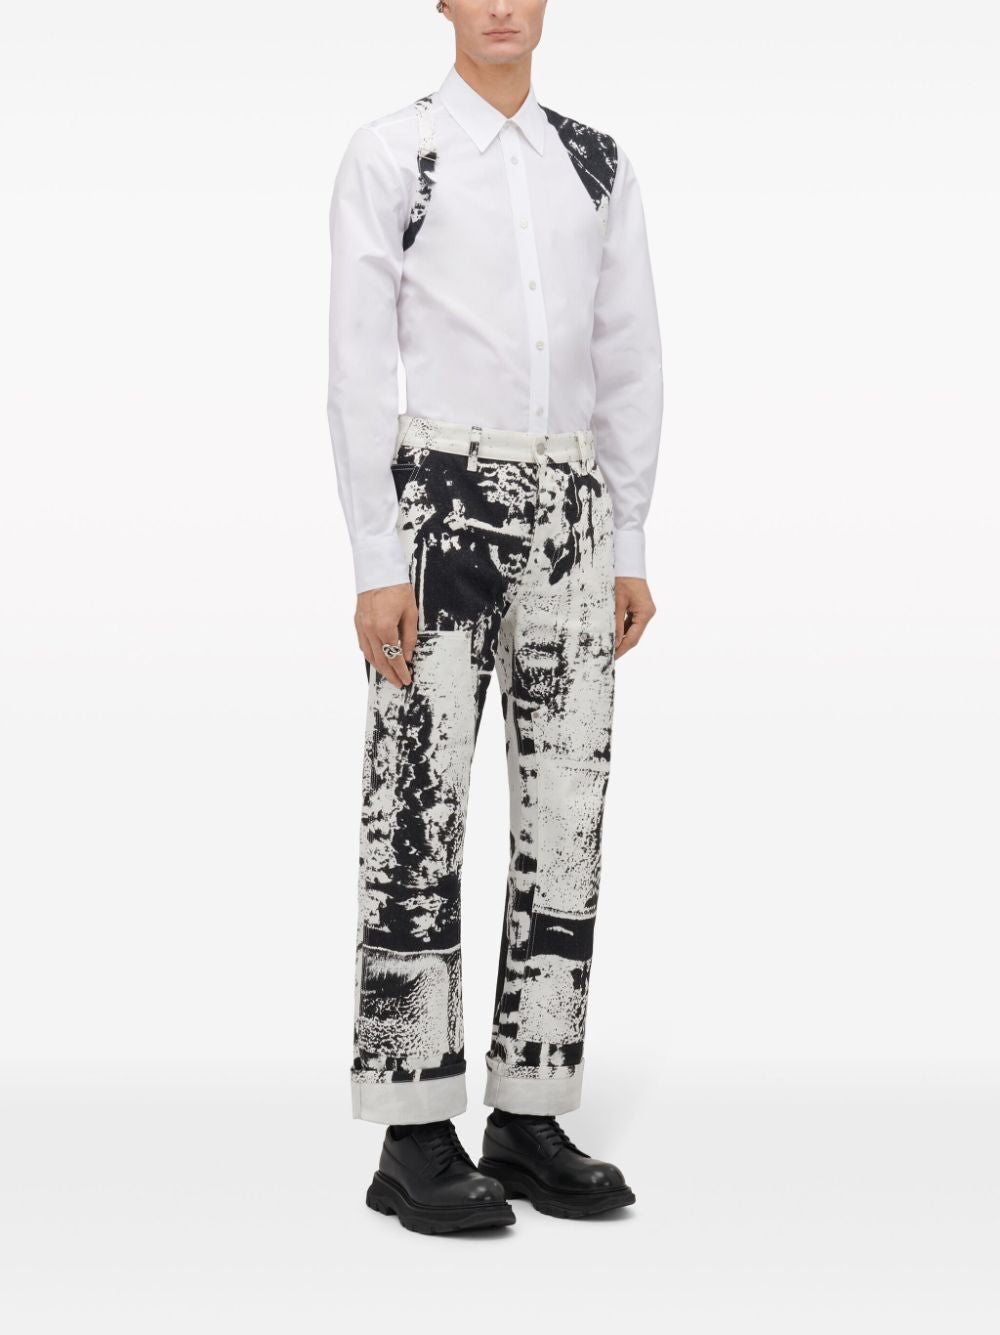 ALEXANDER MCQUEEN Men's Multicolor Workwear Jeans with All-Over 'Fold' Print